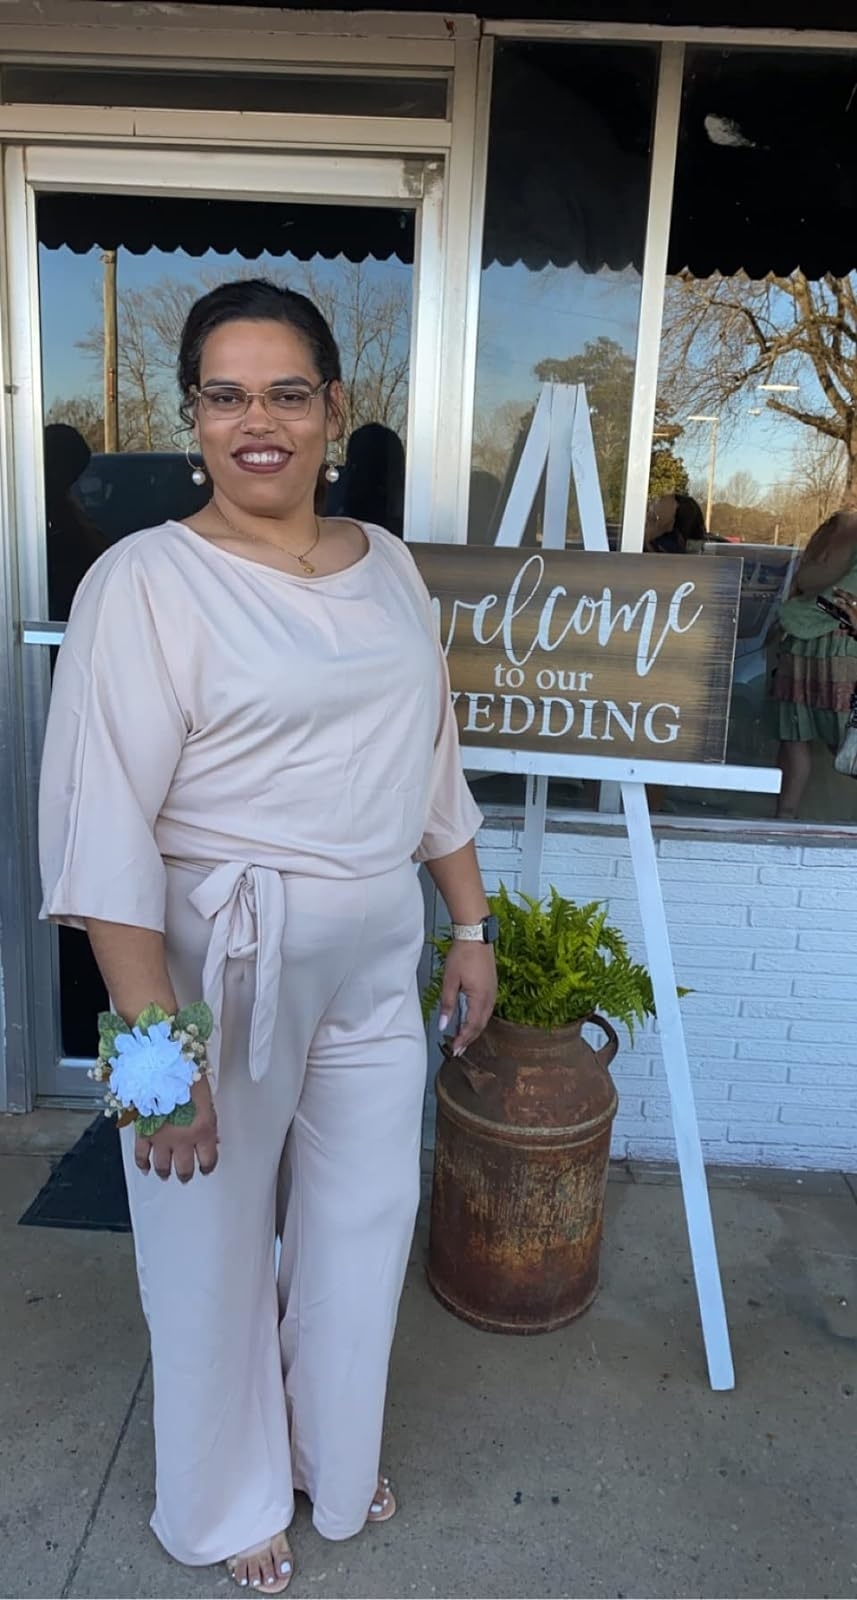 Woman in elegant beige jumpsuit with corsage poses next to &#x27;Welcome to our wedding&#x27; sign